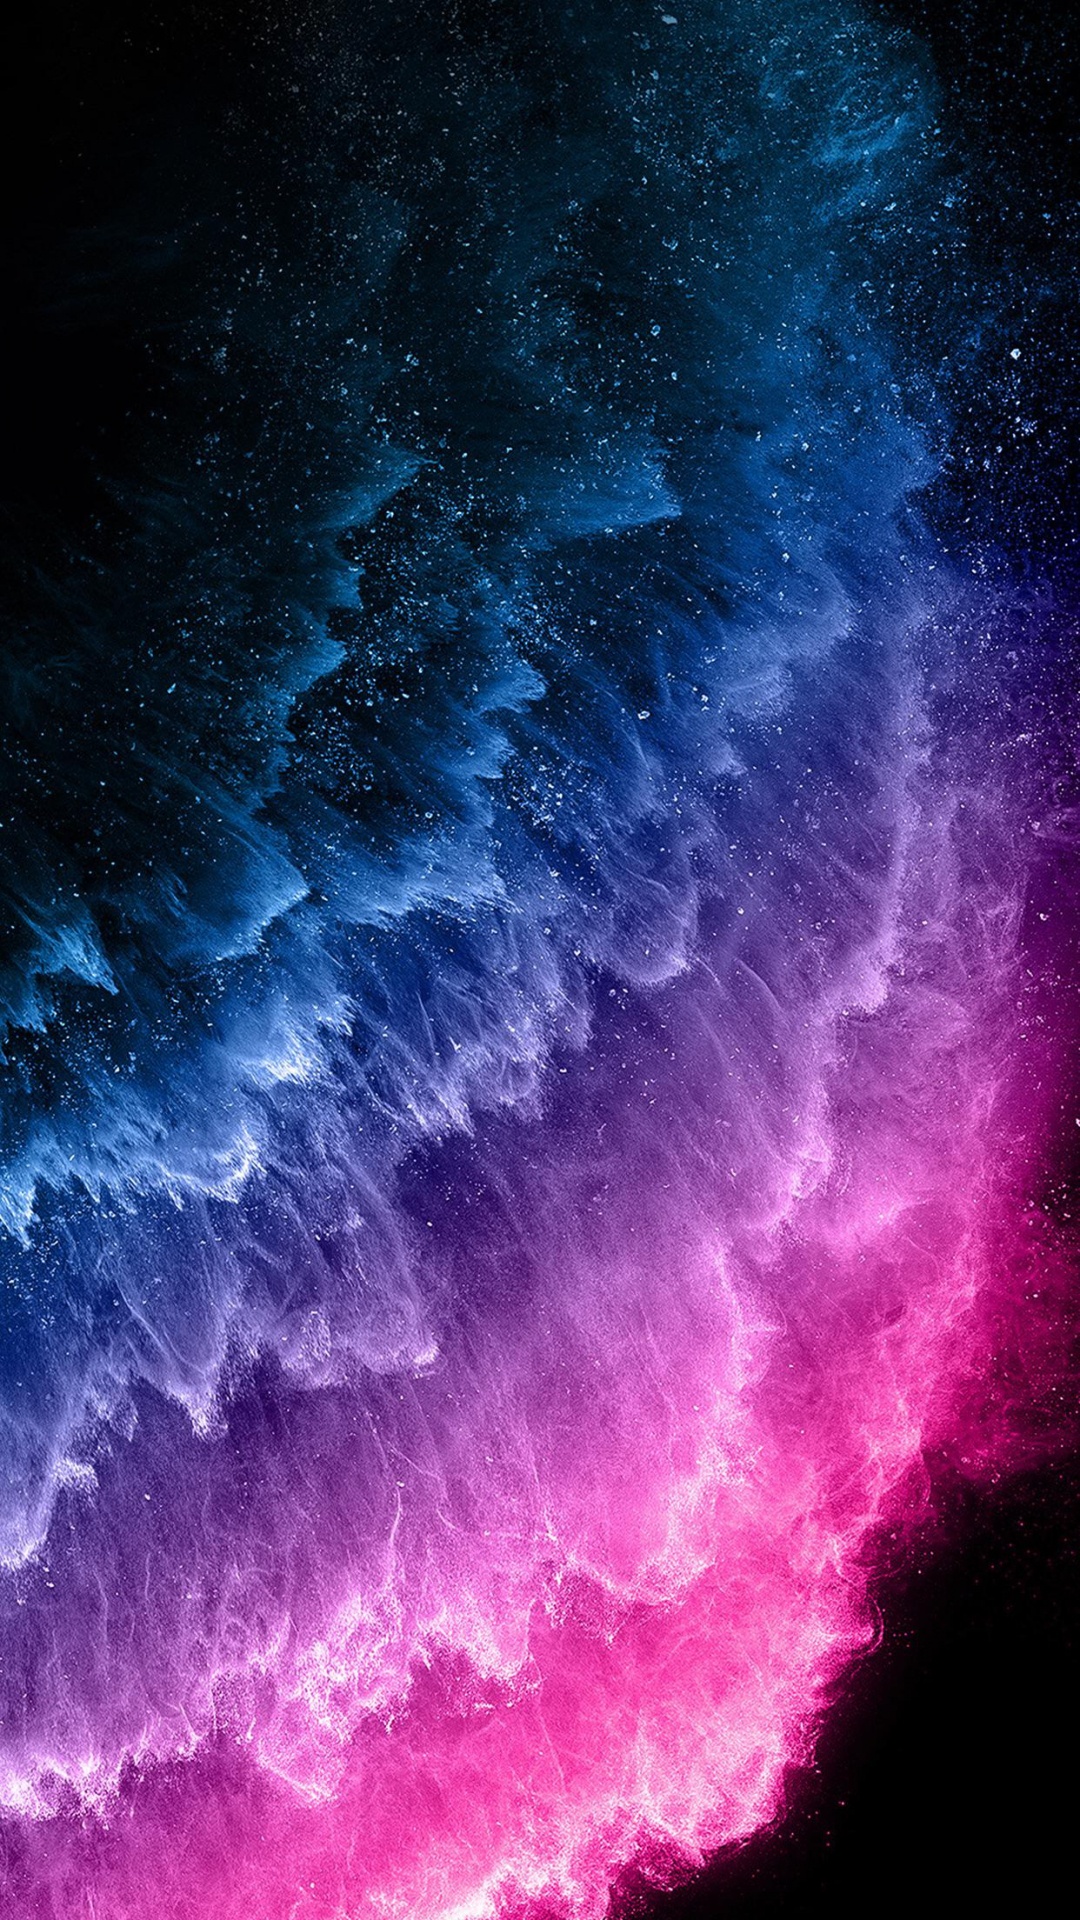 IOS 11, Apples, Android, Ios, Atmosphere. Wallpaper in 1080x1920 Resolution